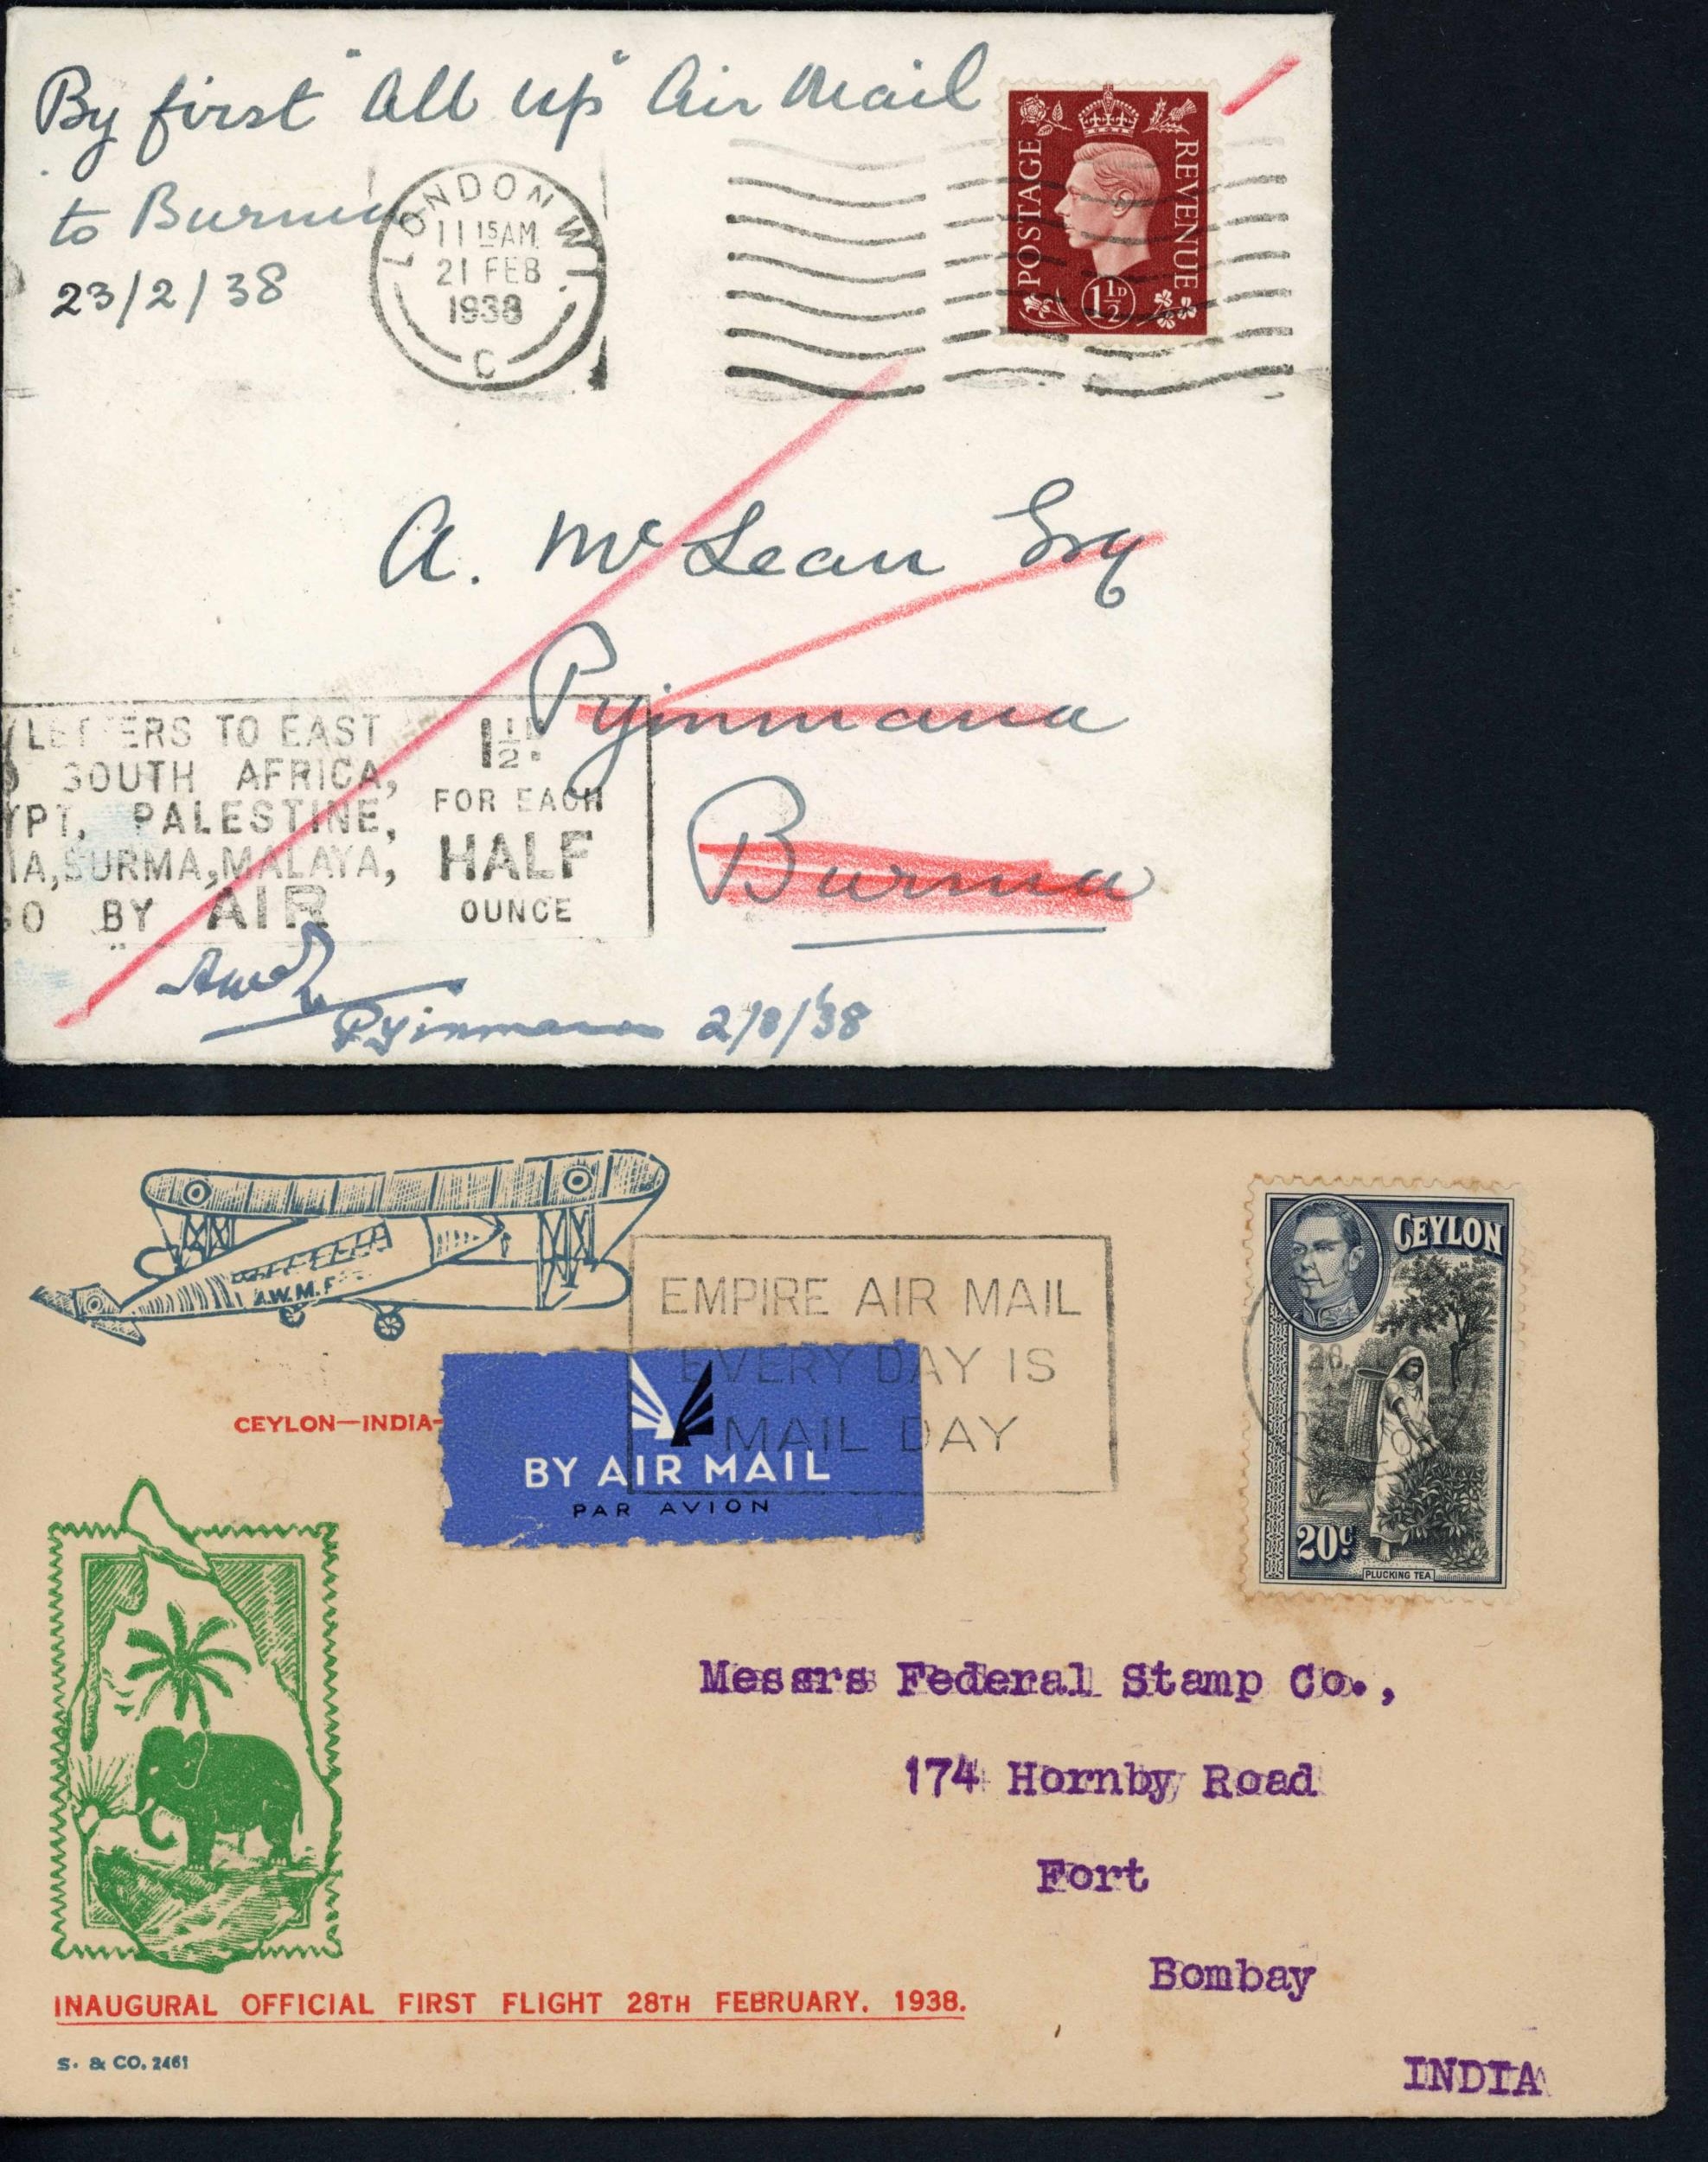 THE EMPIRE AIR MAIL SCHEME STAGE 2 - NEAR/MIDDLE & FAR EAST: 1938 ...